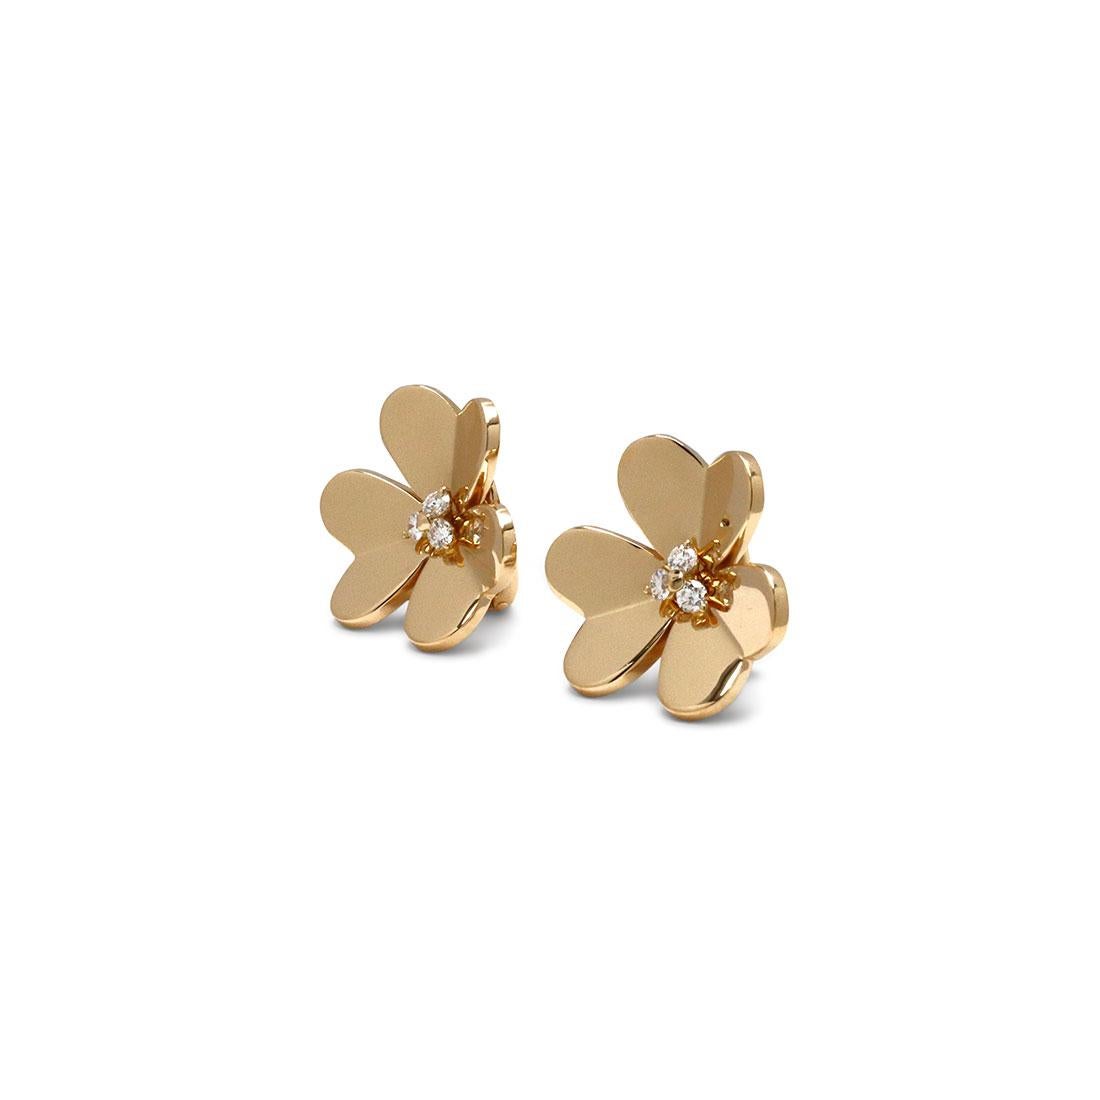 Authentic Van Cleef & Arpels 'Frivole' earrings feature mirror-polished 18 karat yellow gold heart-shaped petals set with three round brilliant cut diamonds at the center for an estimated 0.32 carats total weight. Signed VCA, 750, with serial number